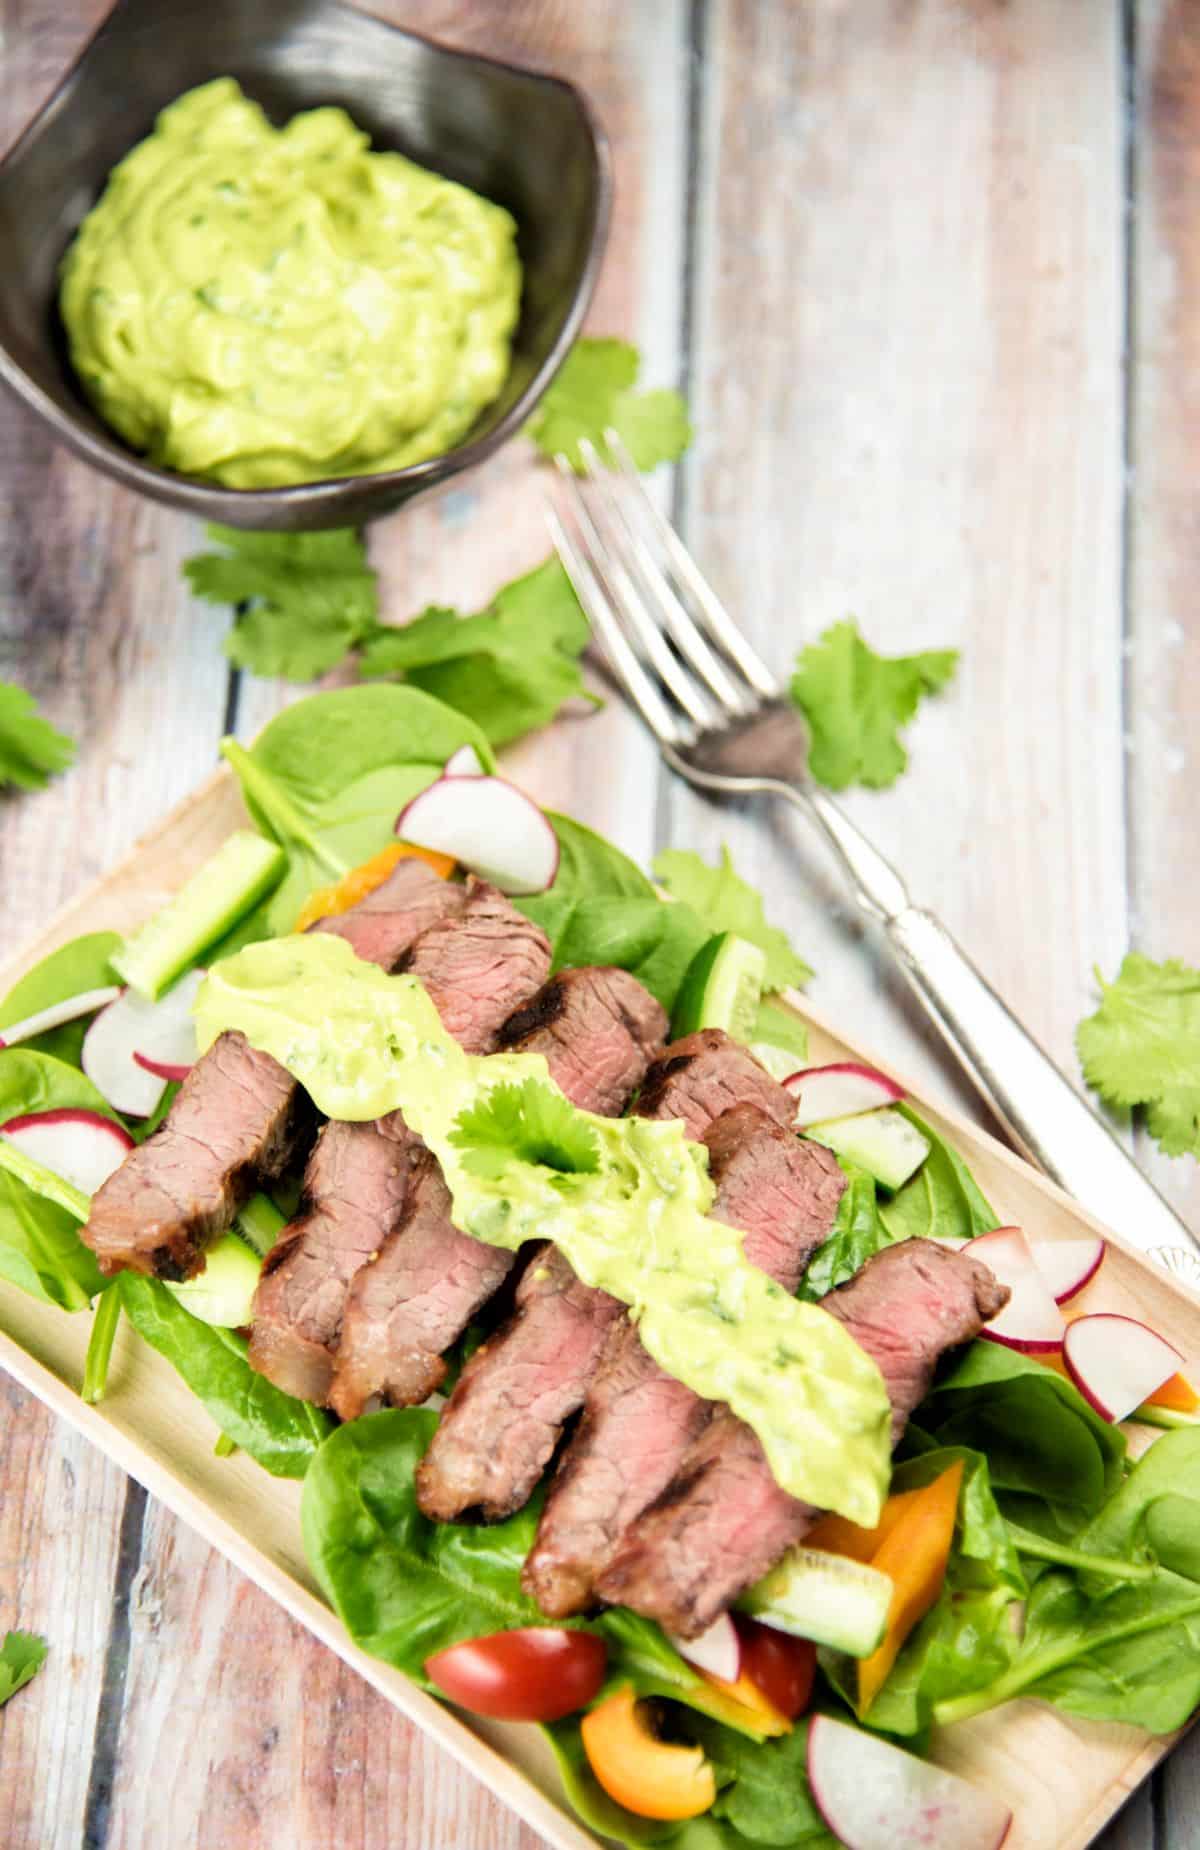 Steak Salad with Avocado Dressing on a wooden cutting board.